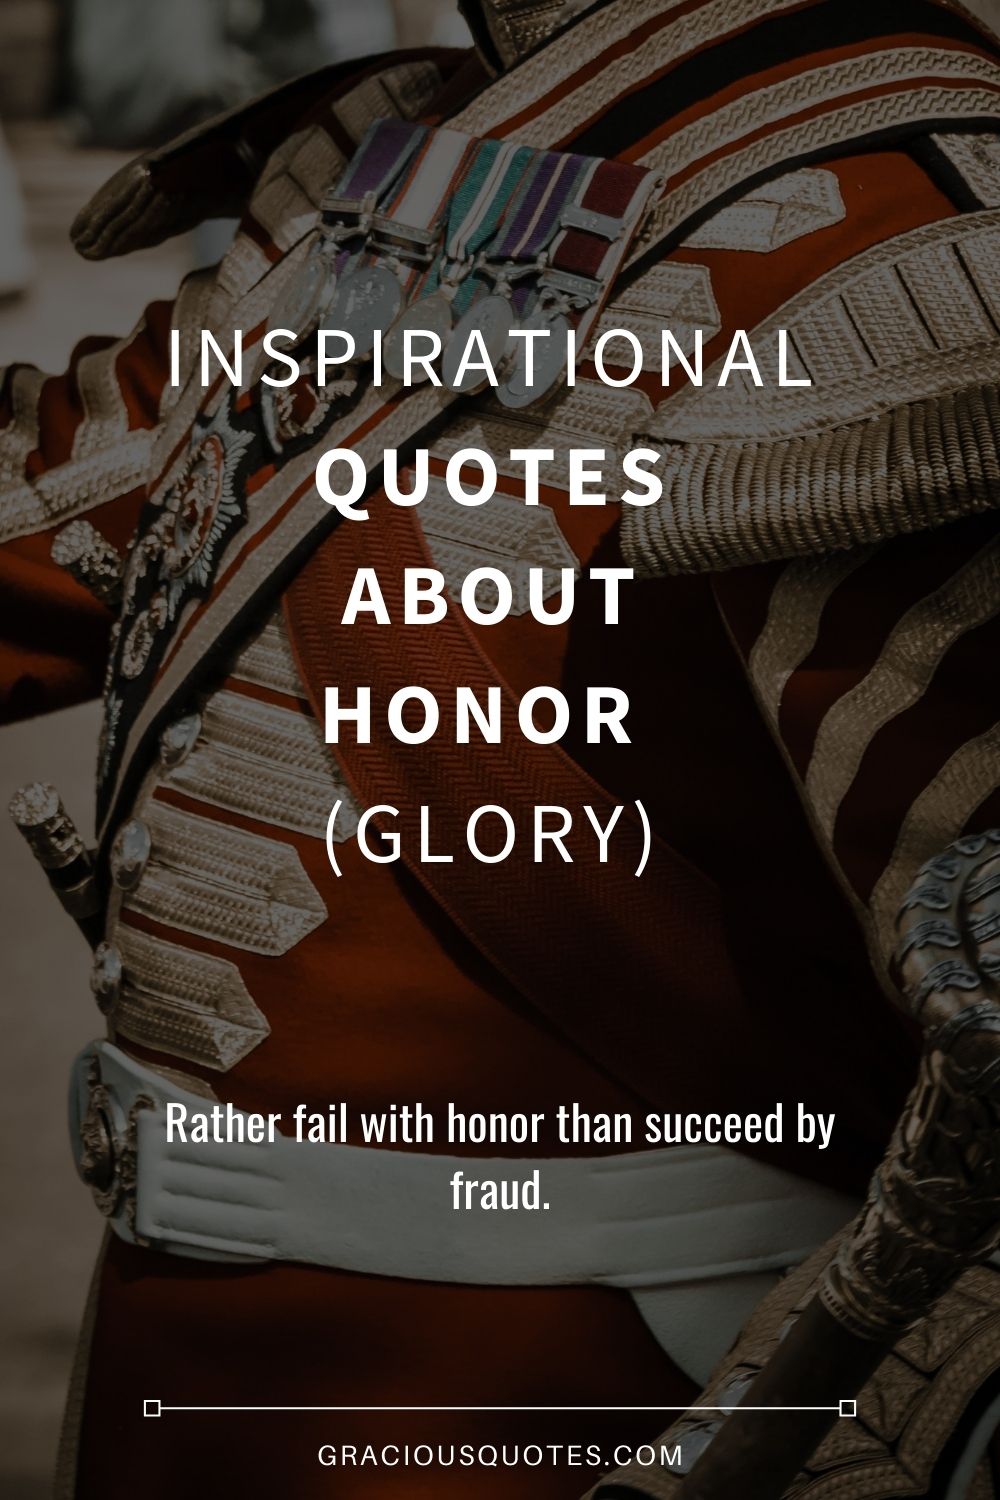 Inspirational Quotes About Honor (GLORY) - Gracious Quotes